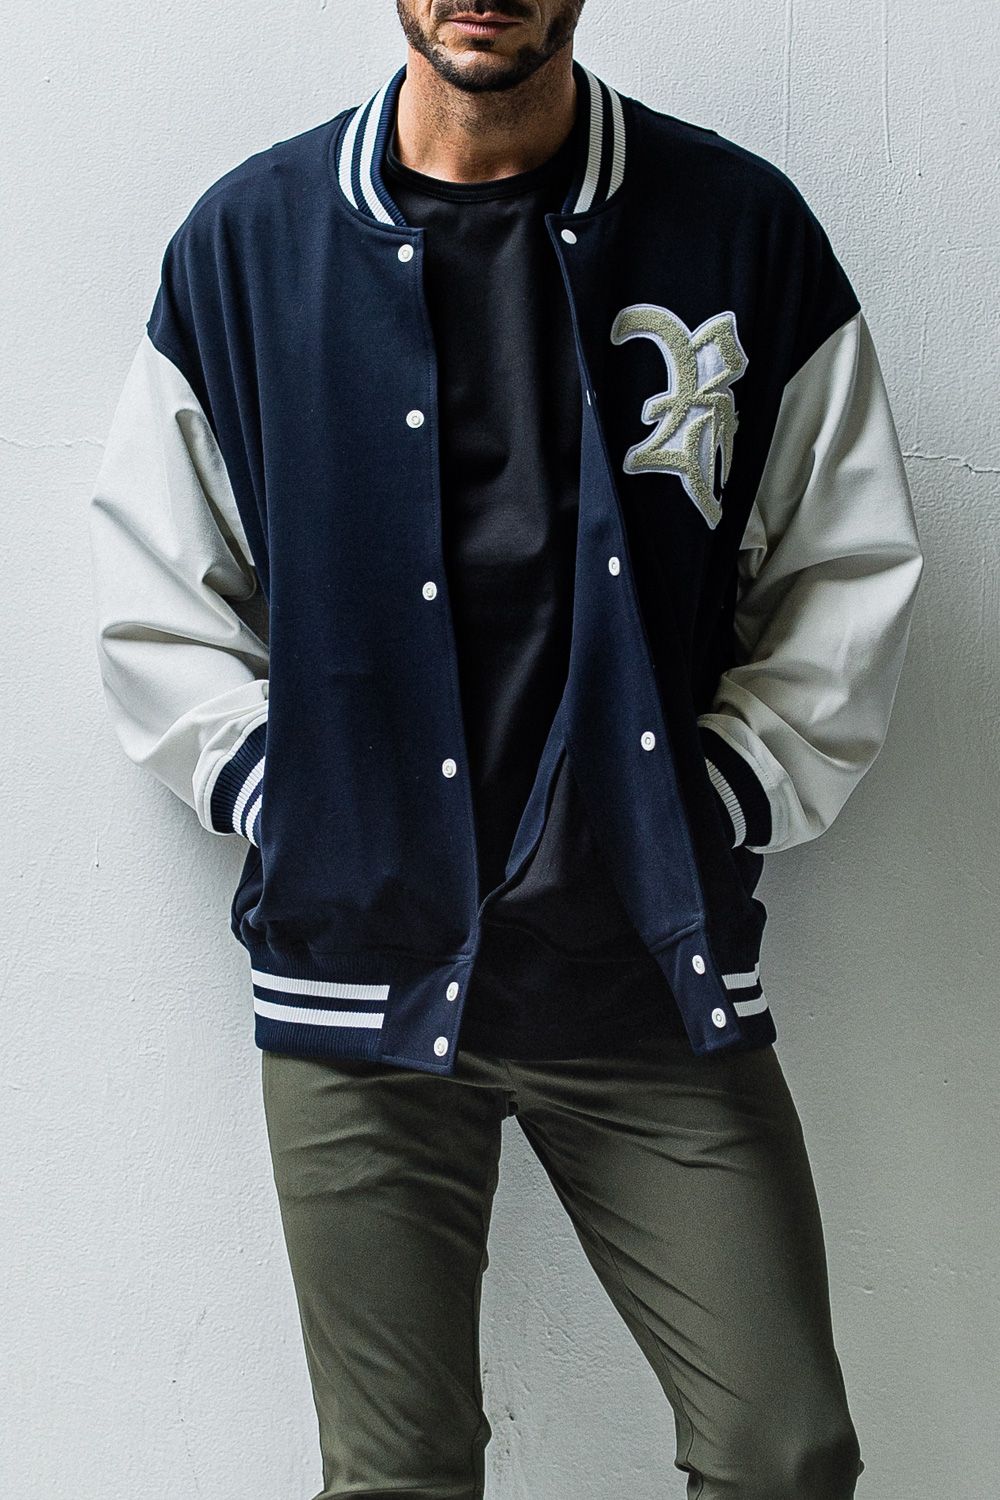 RESOUND CLOTHING - RC JERSEY OVER VARSITY JACKET / RCロゴ ジャージ ...